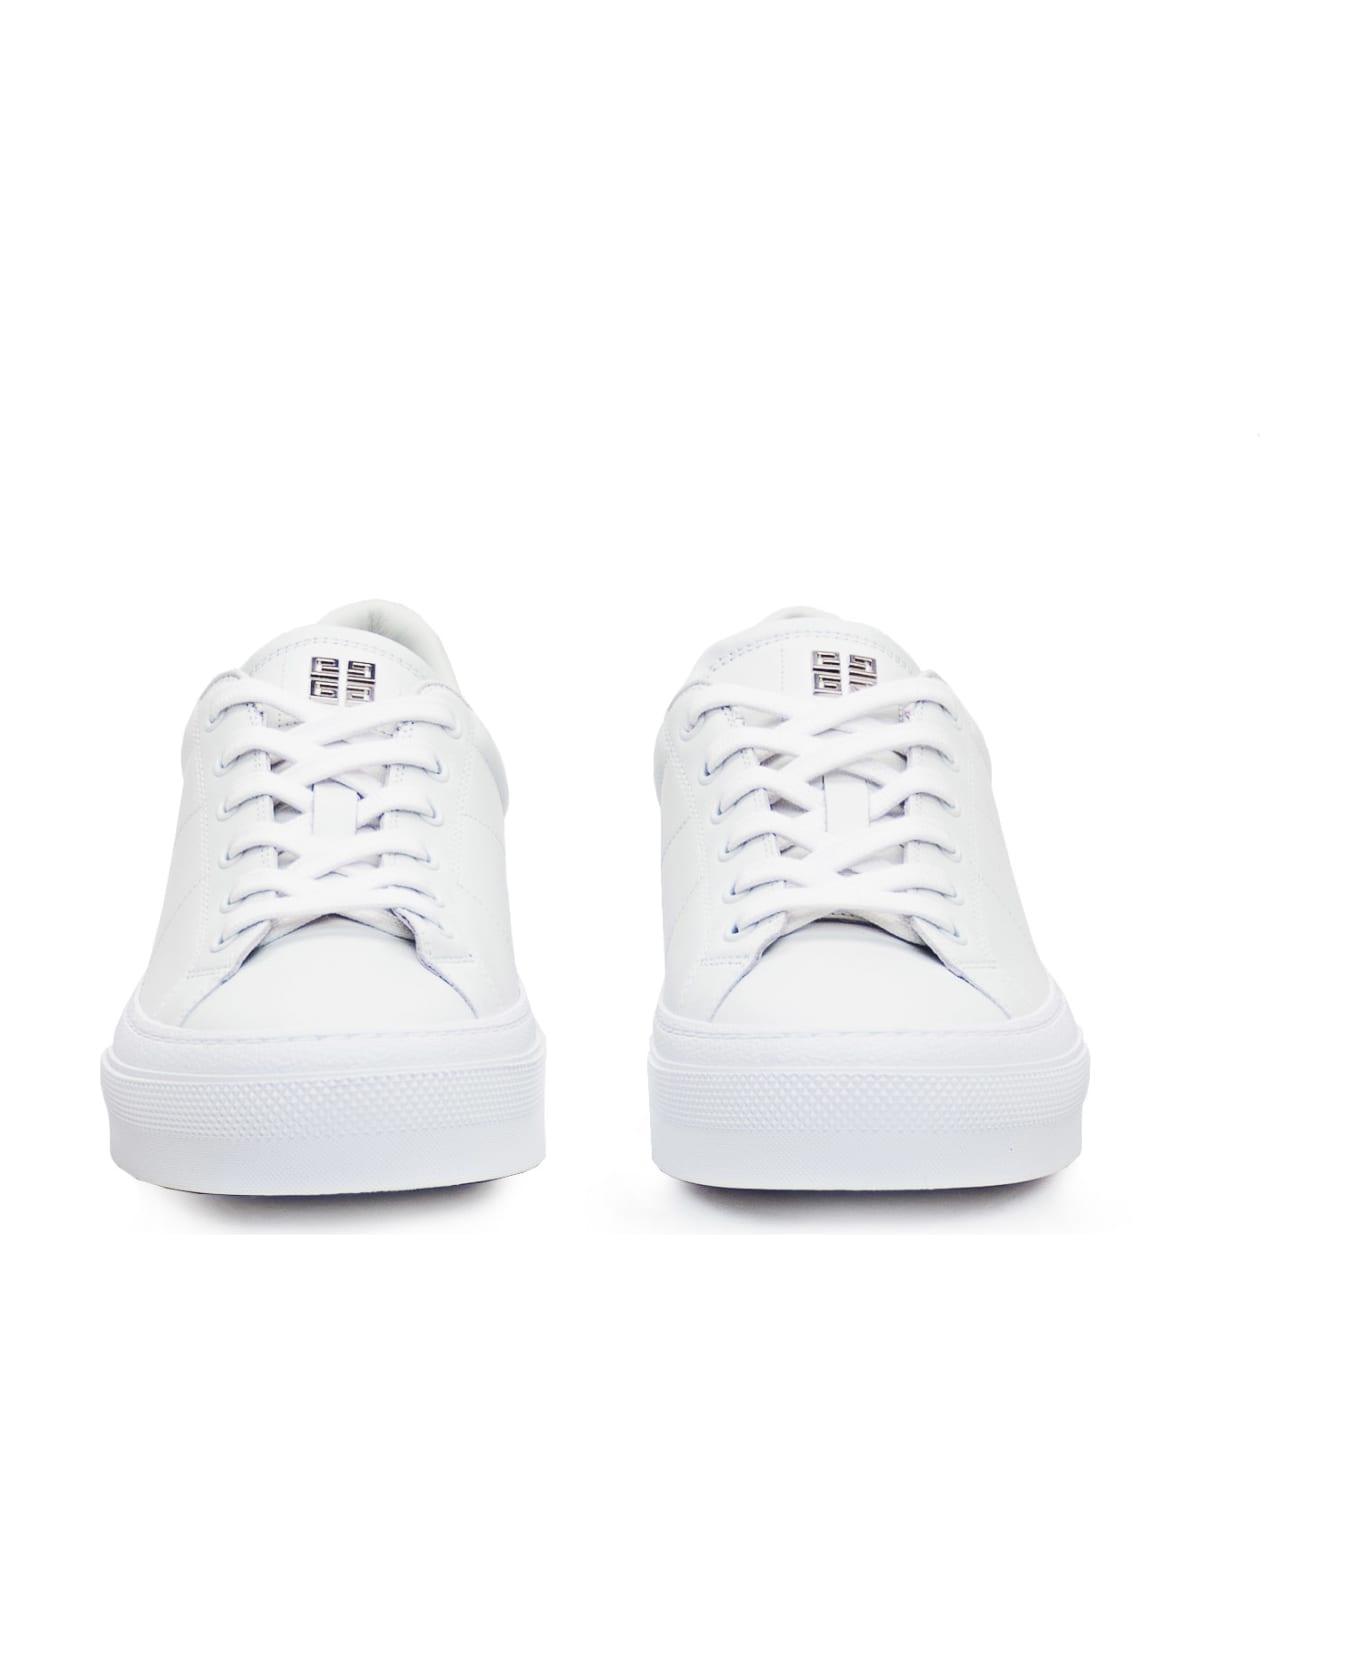 Givenchy City Sport Sneaker - WHITE BLUE